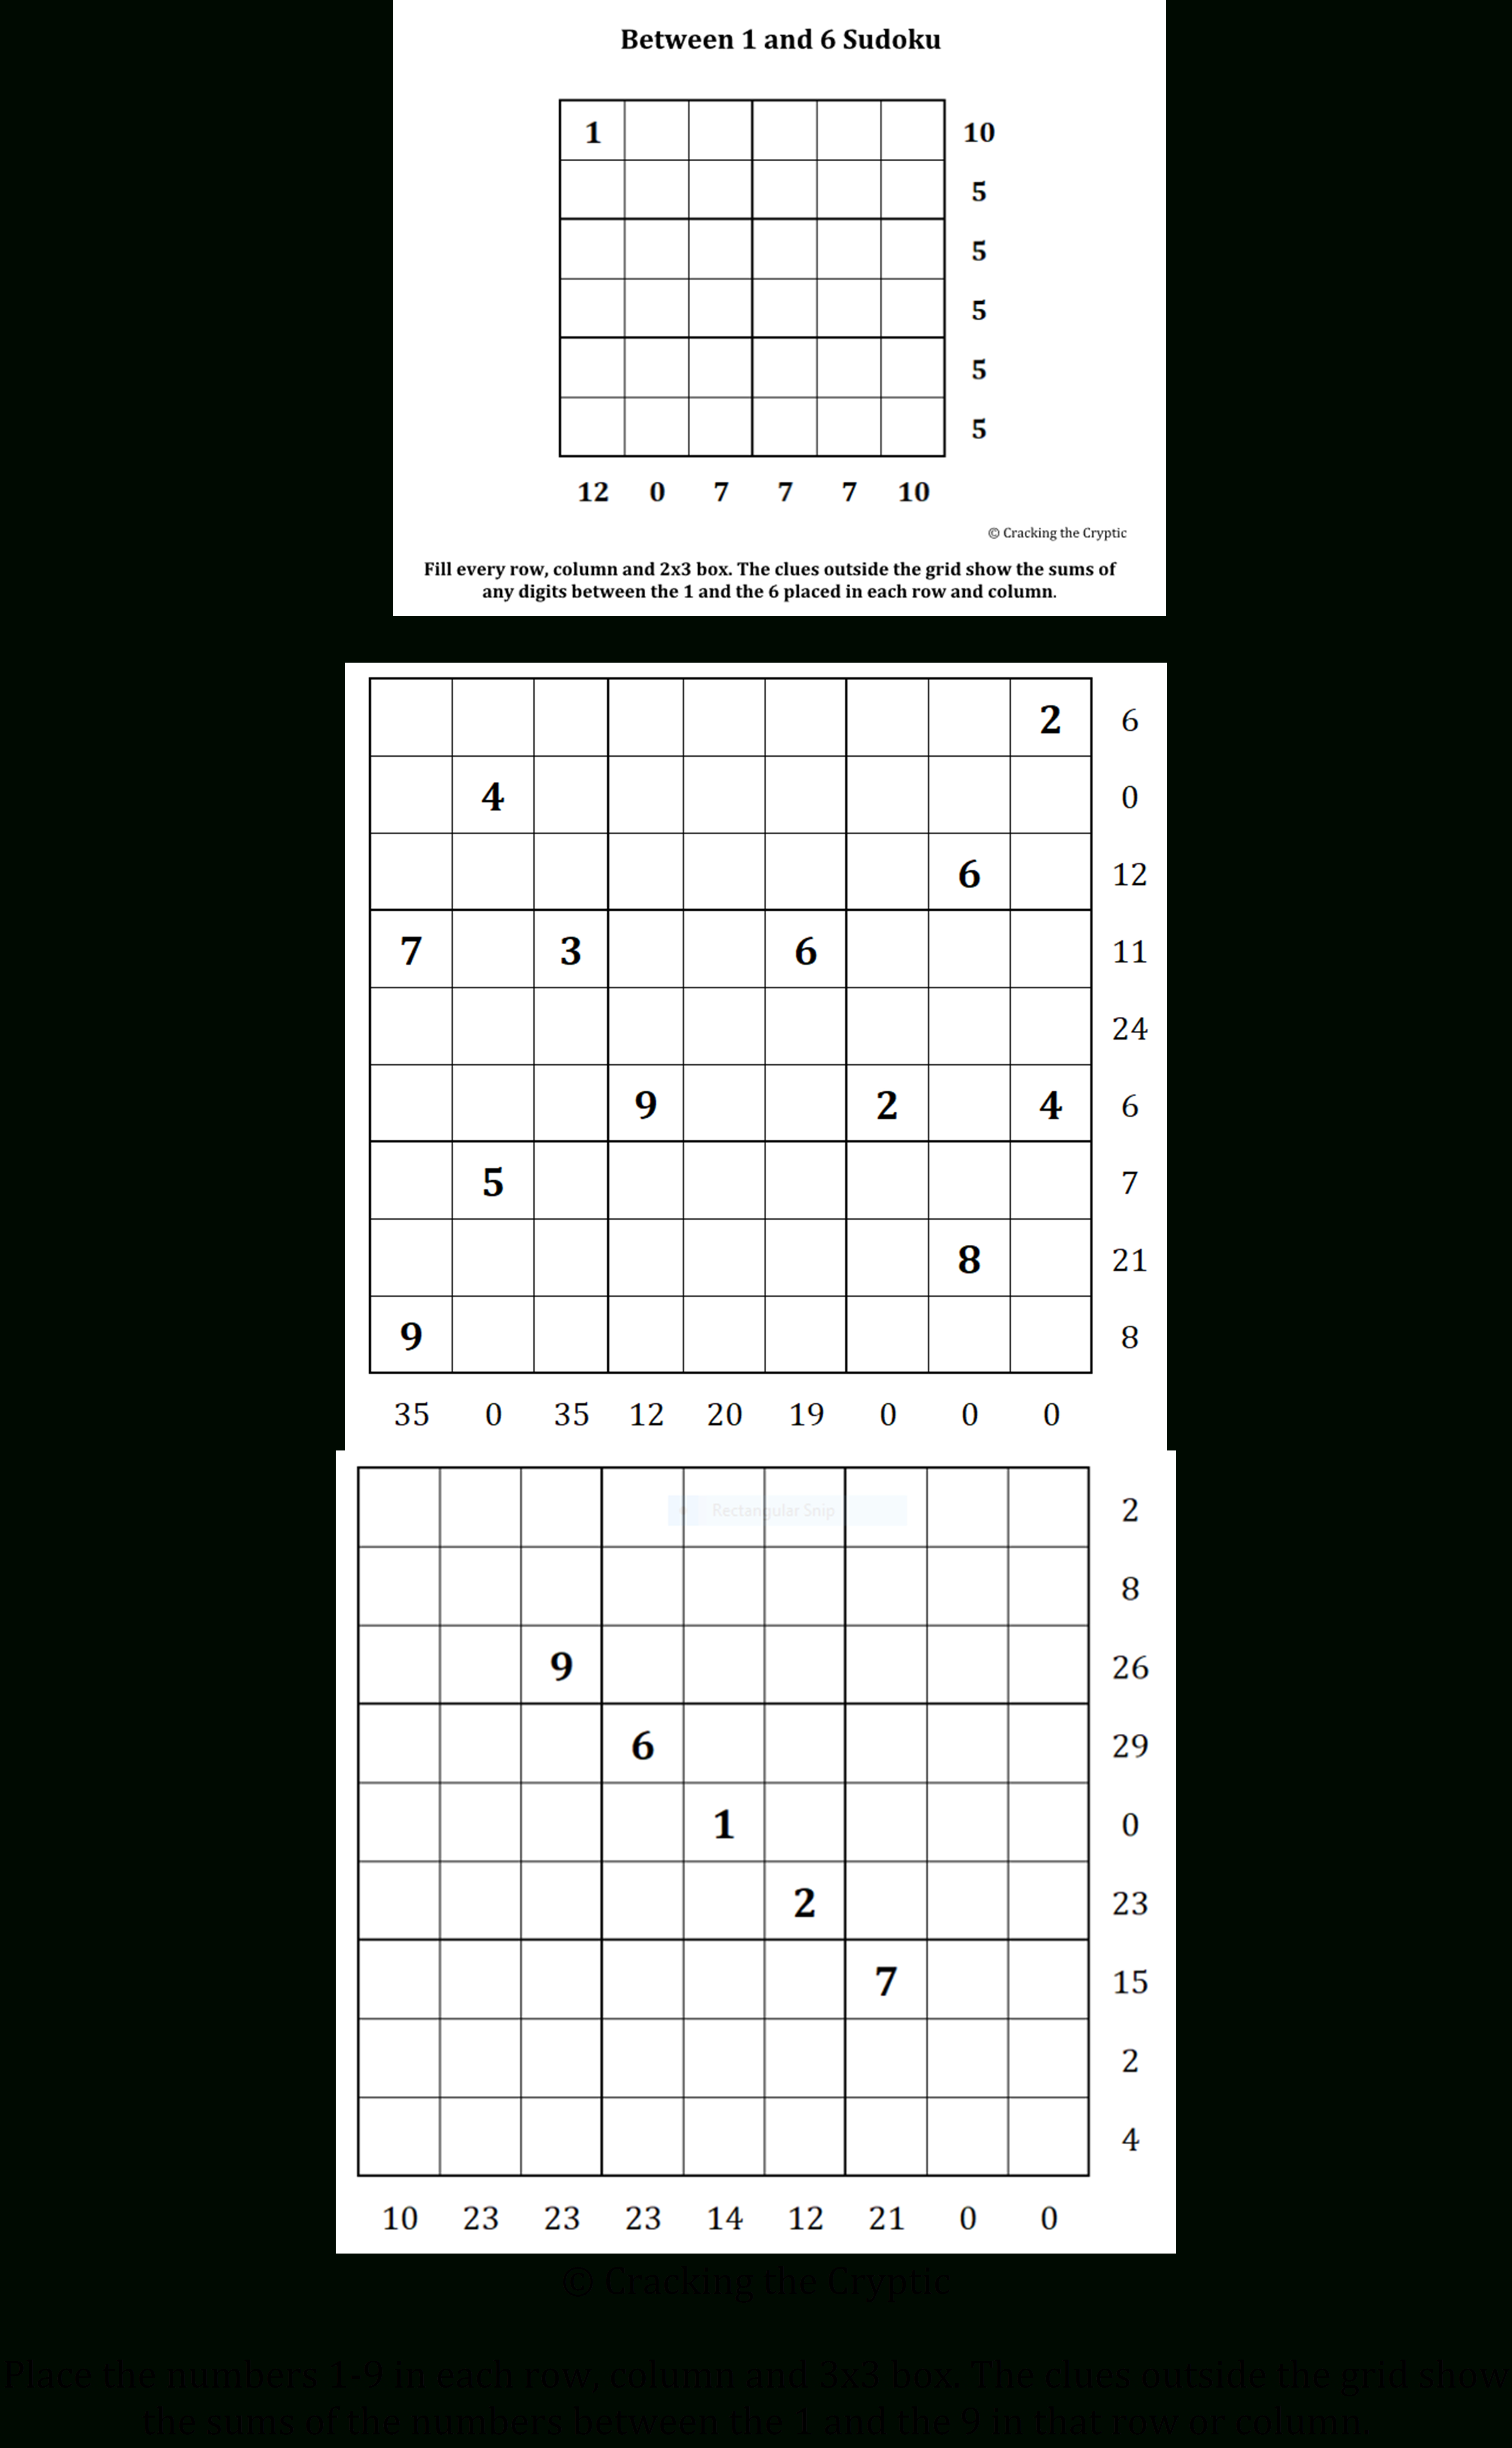 Can You Solve It? Sandwich Sudoku - A New Puzzle Goes Viral - Guardian Quick Crossword Printable Version